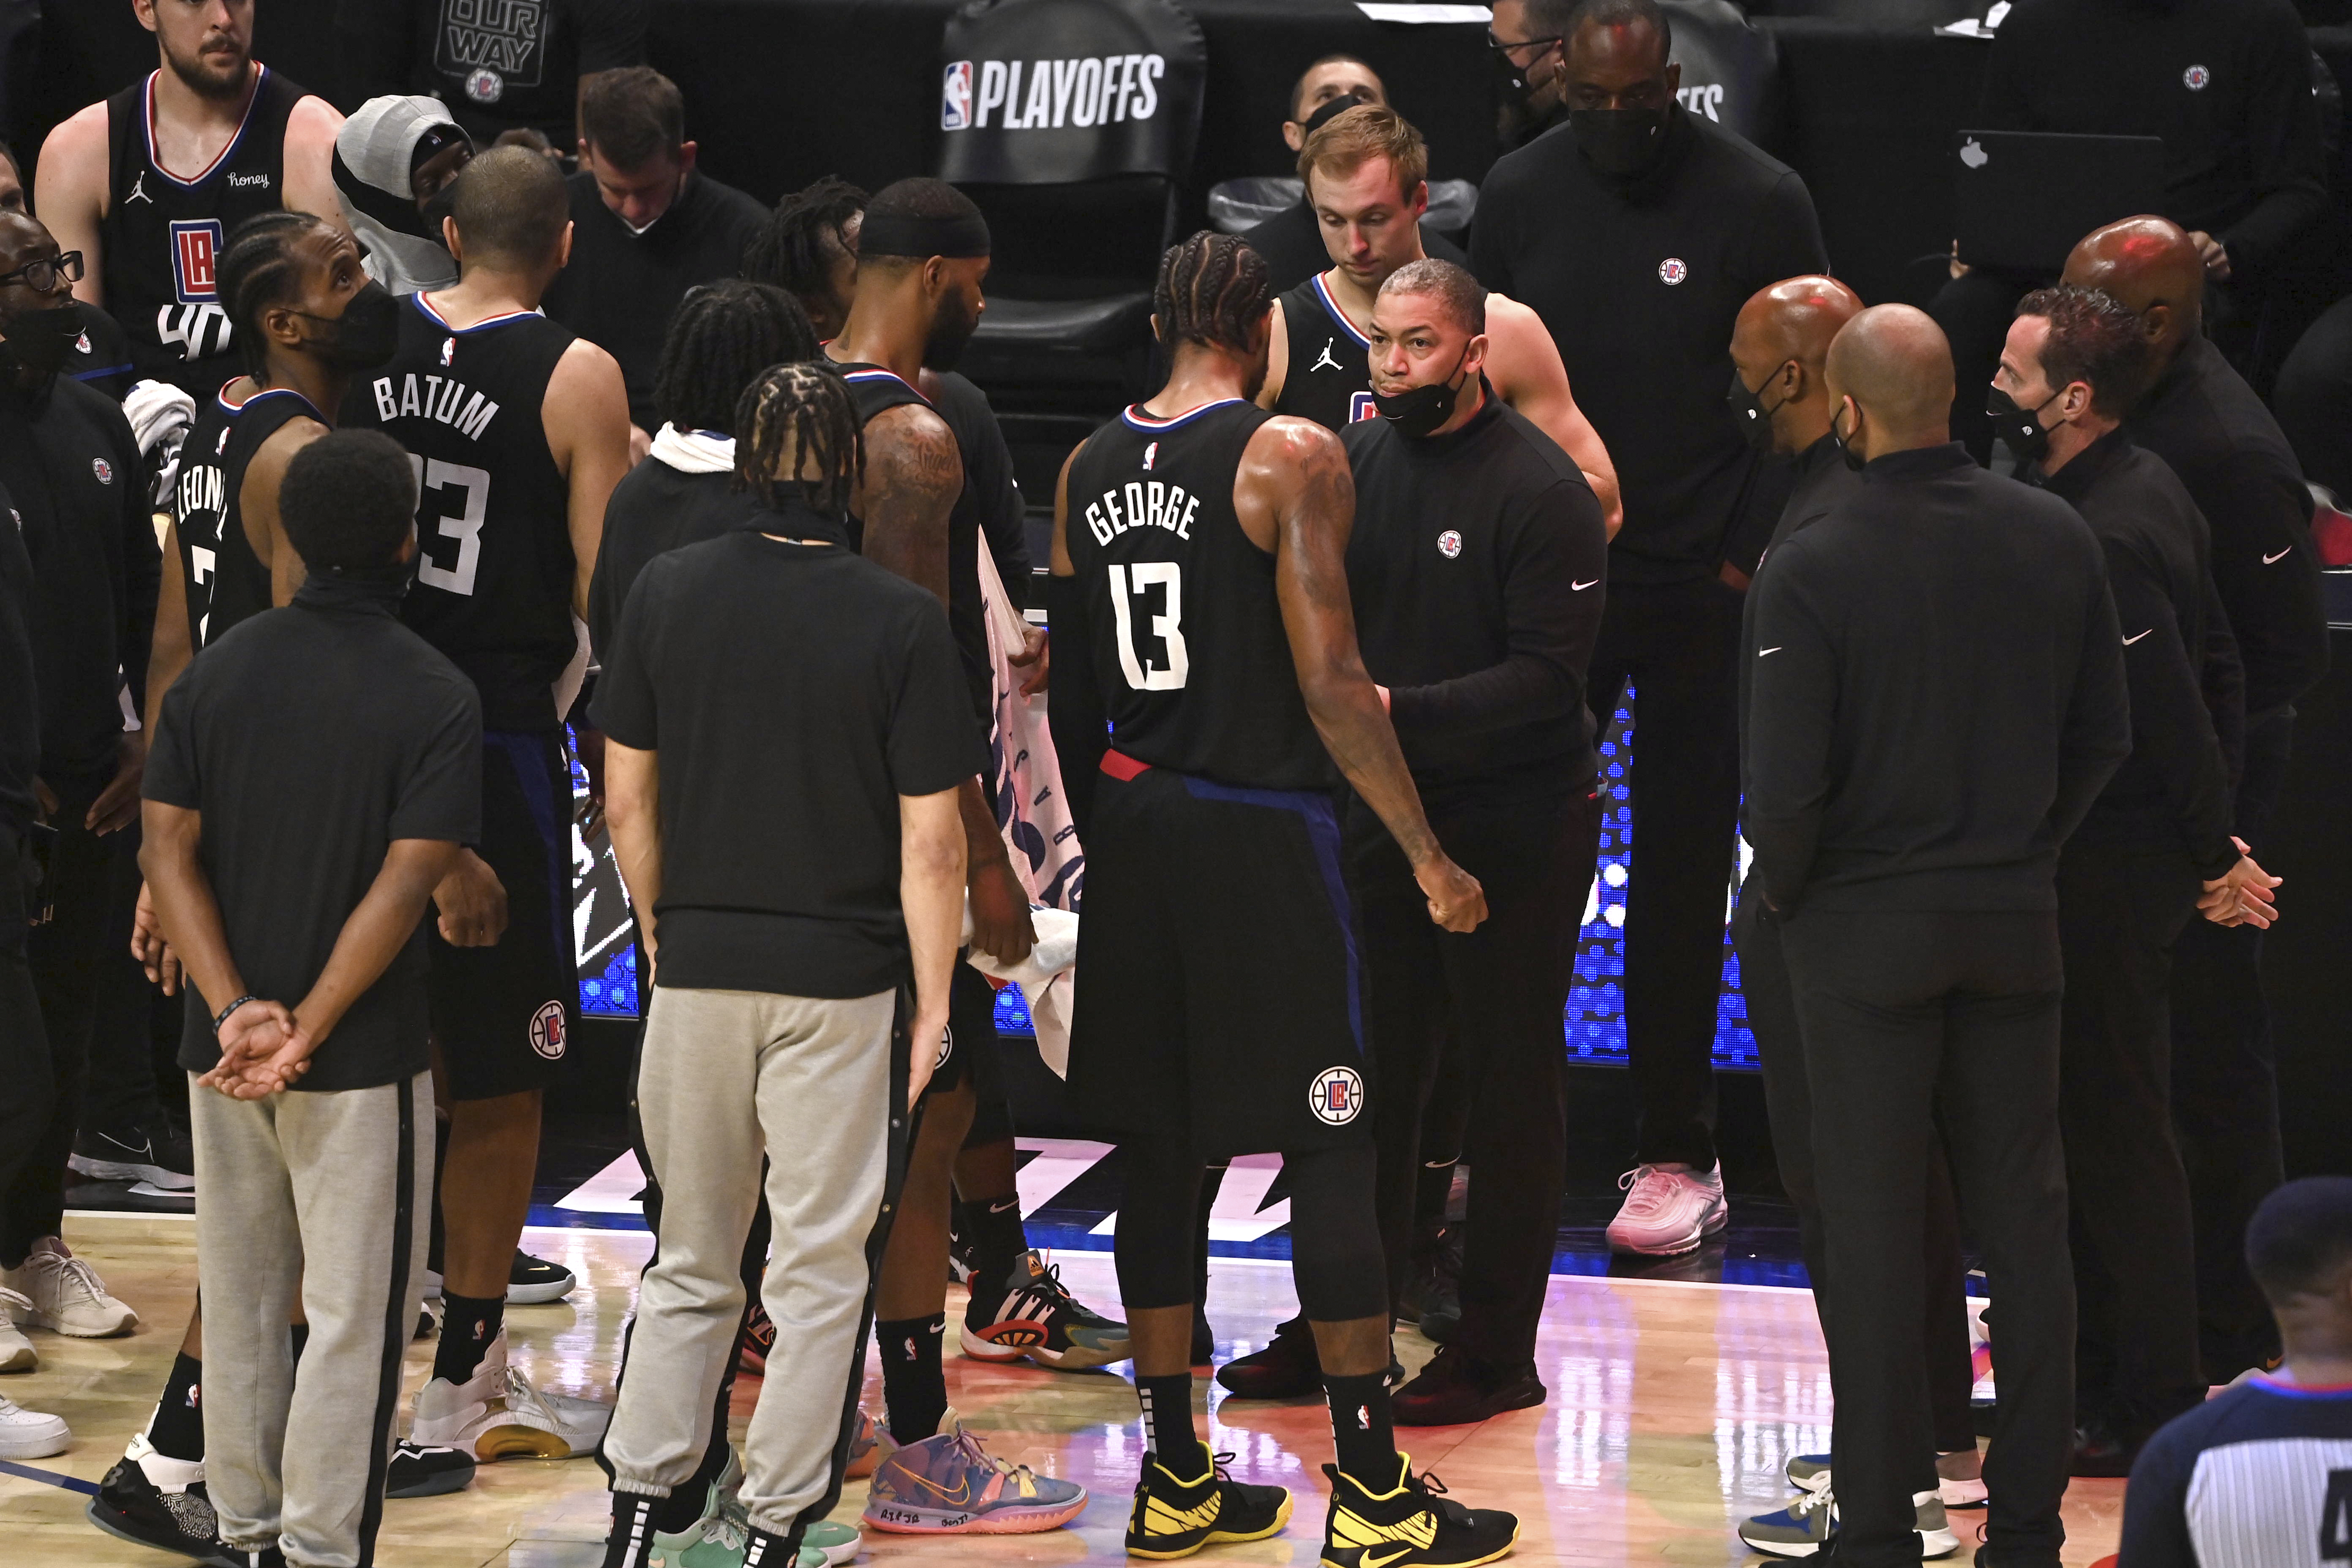 Los Angeles Clippers vs Utah Jazz, 2021 NBA Western Conference Semifinals